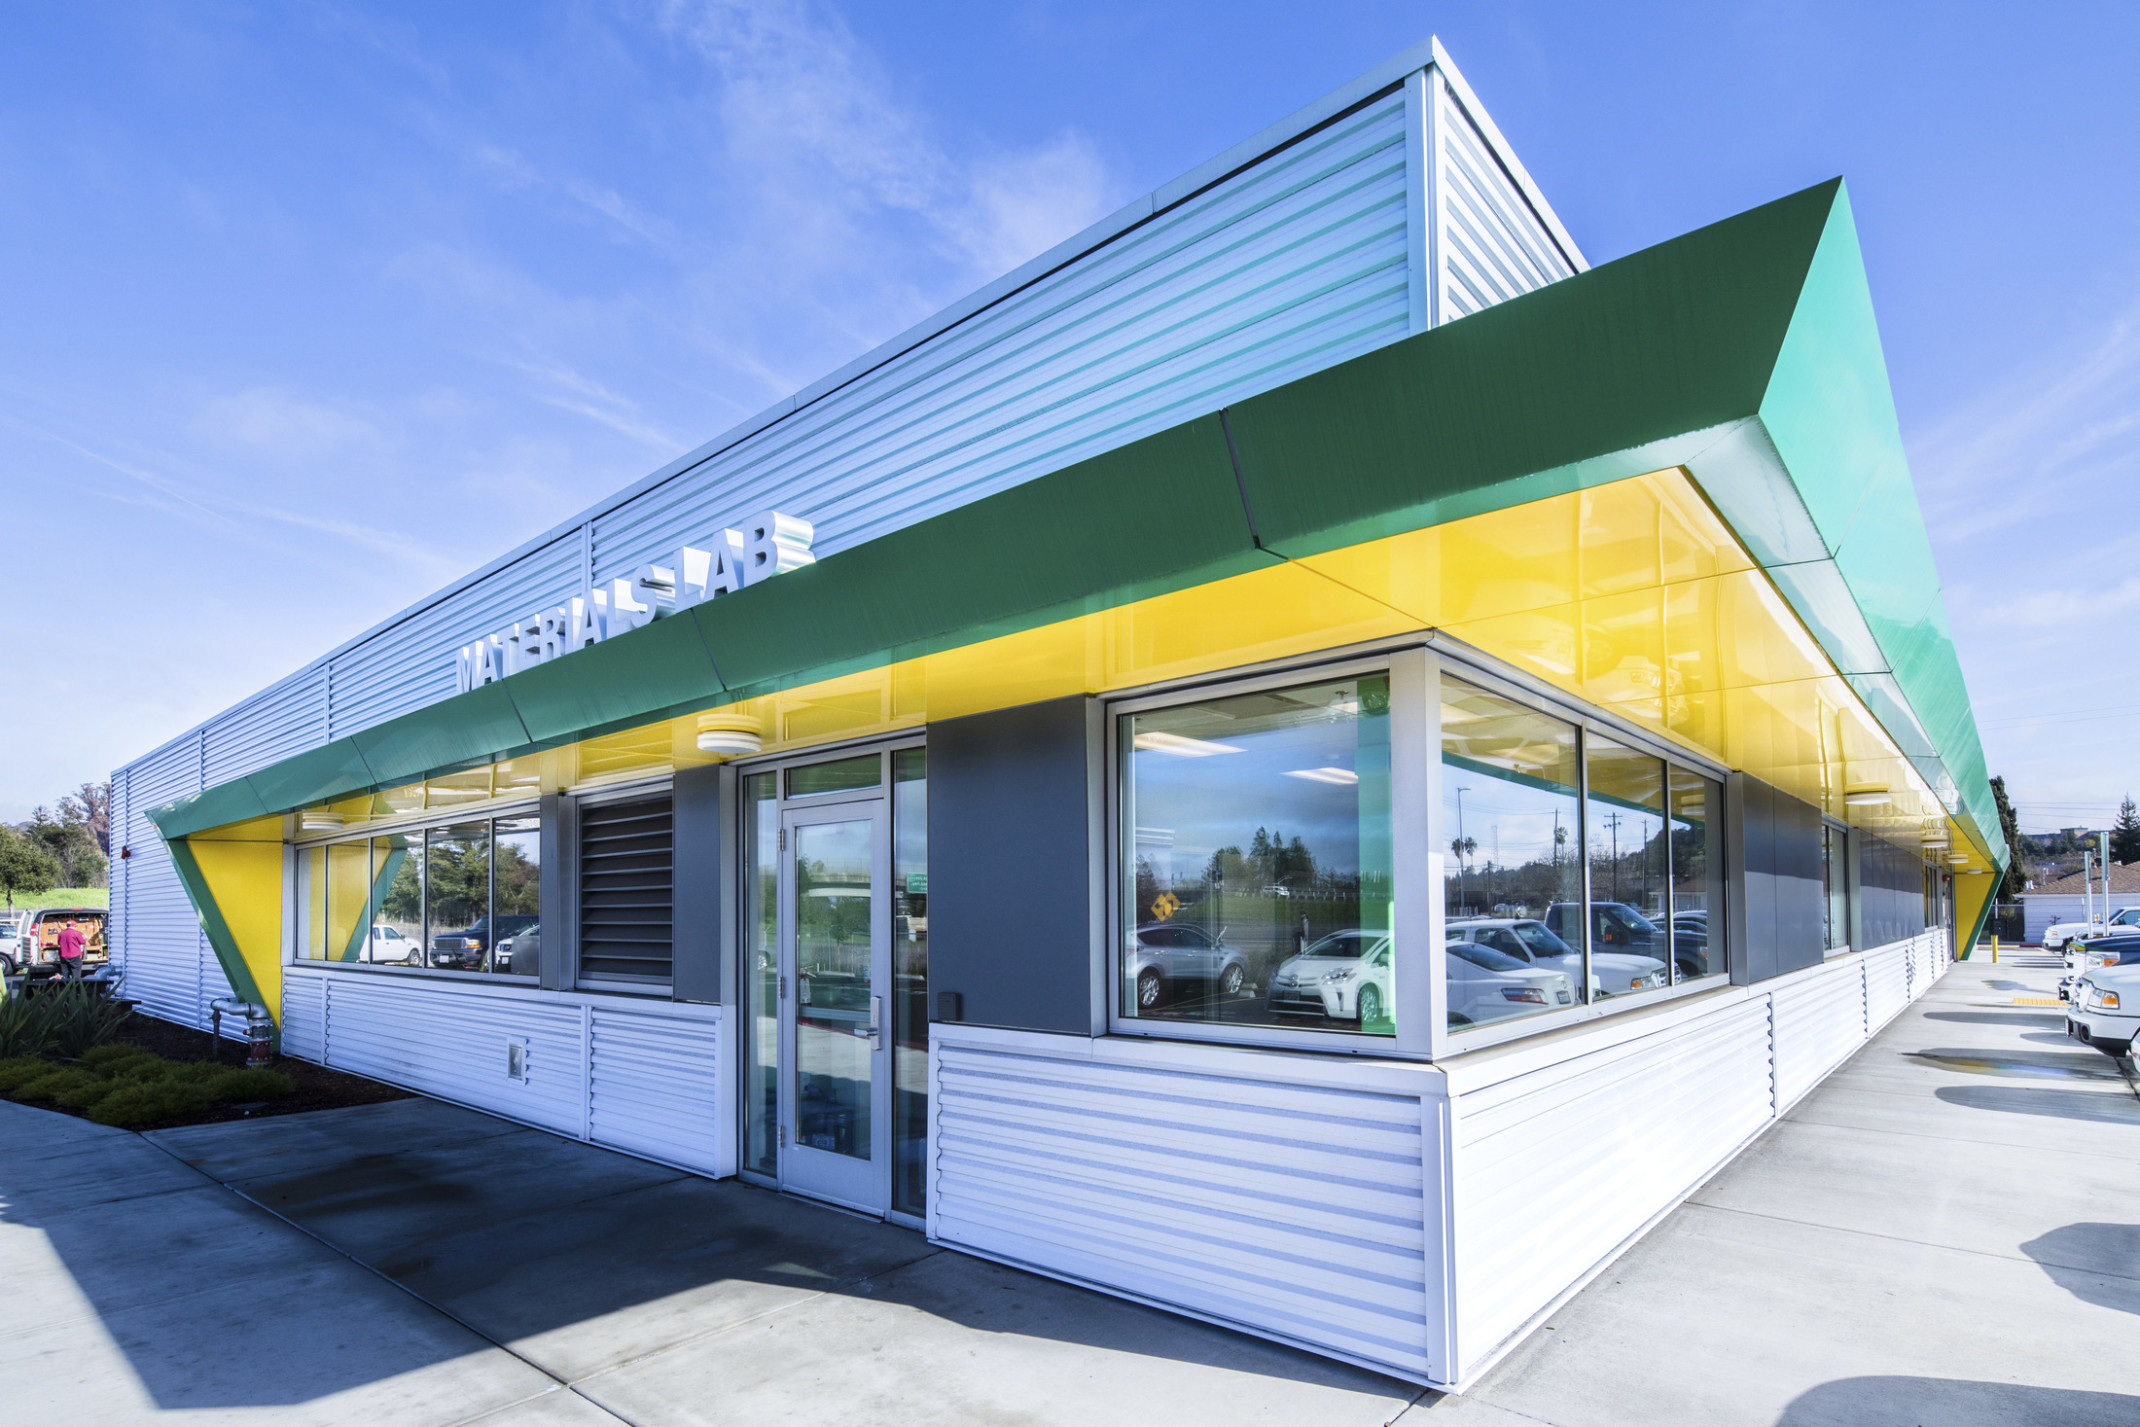 Sonoma County Fleet Maintenance and Soils Testing Lab Building corner view with green and yellow awning over silver panels